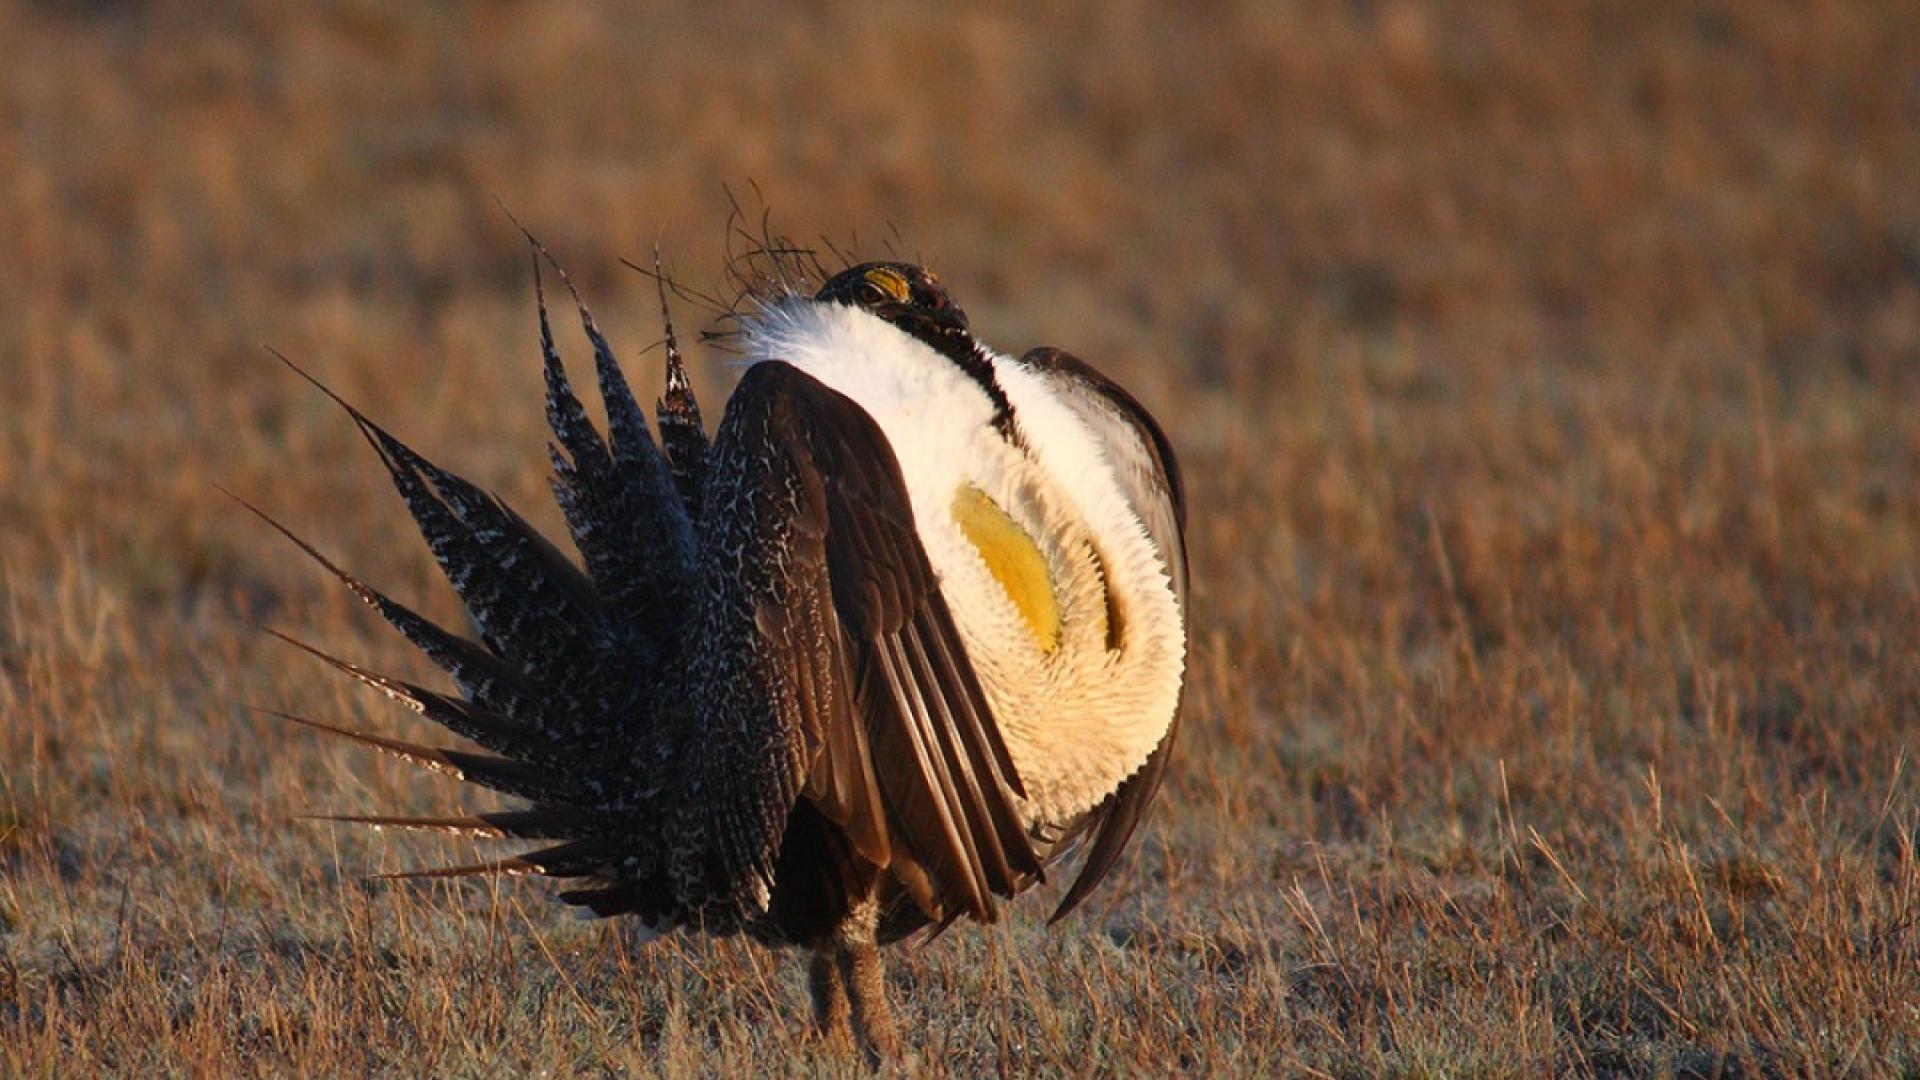 Greater sage-grouse in a field at dawn. Photo by Steve Fairbairn, USFWS.